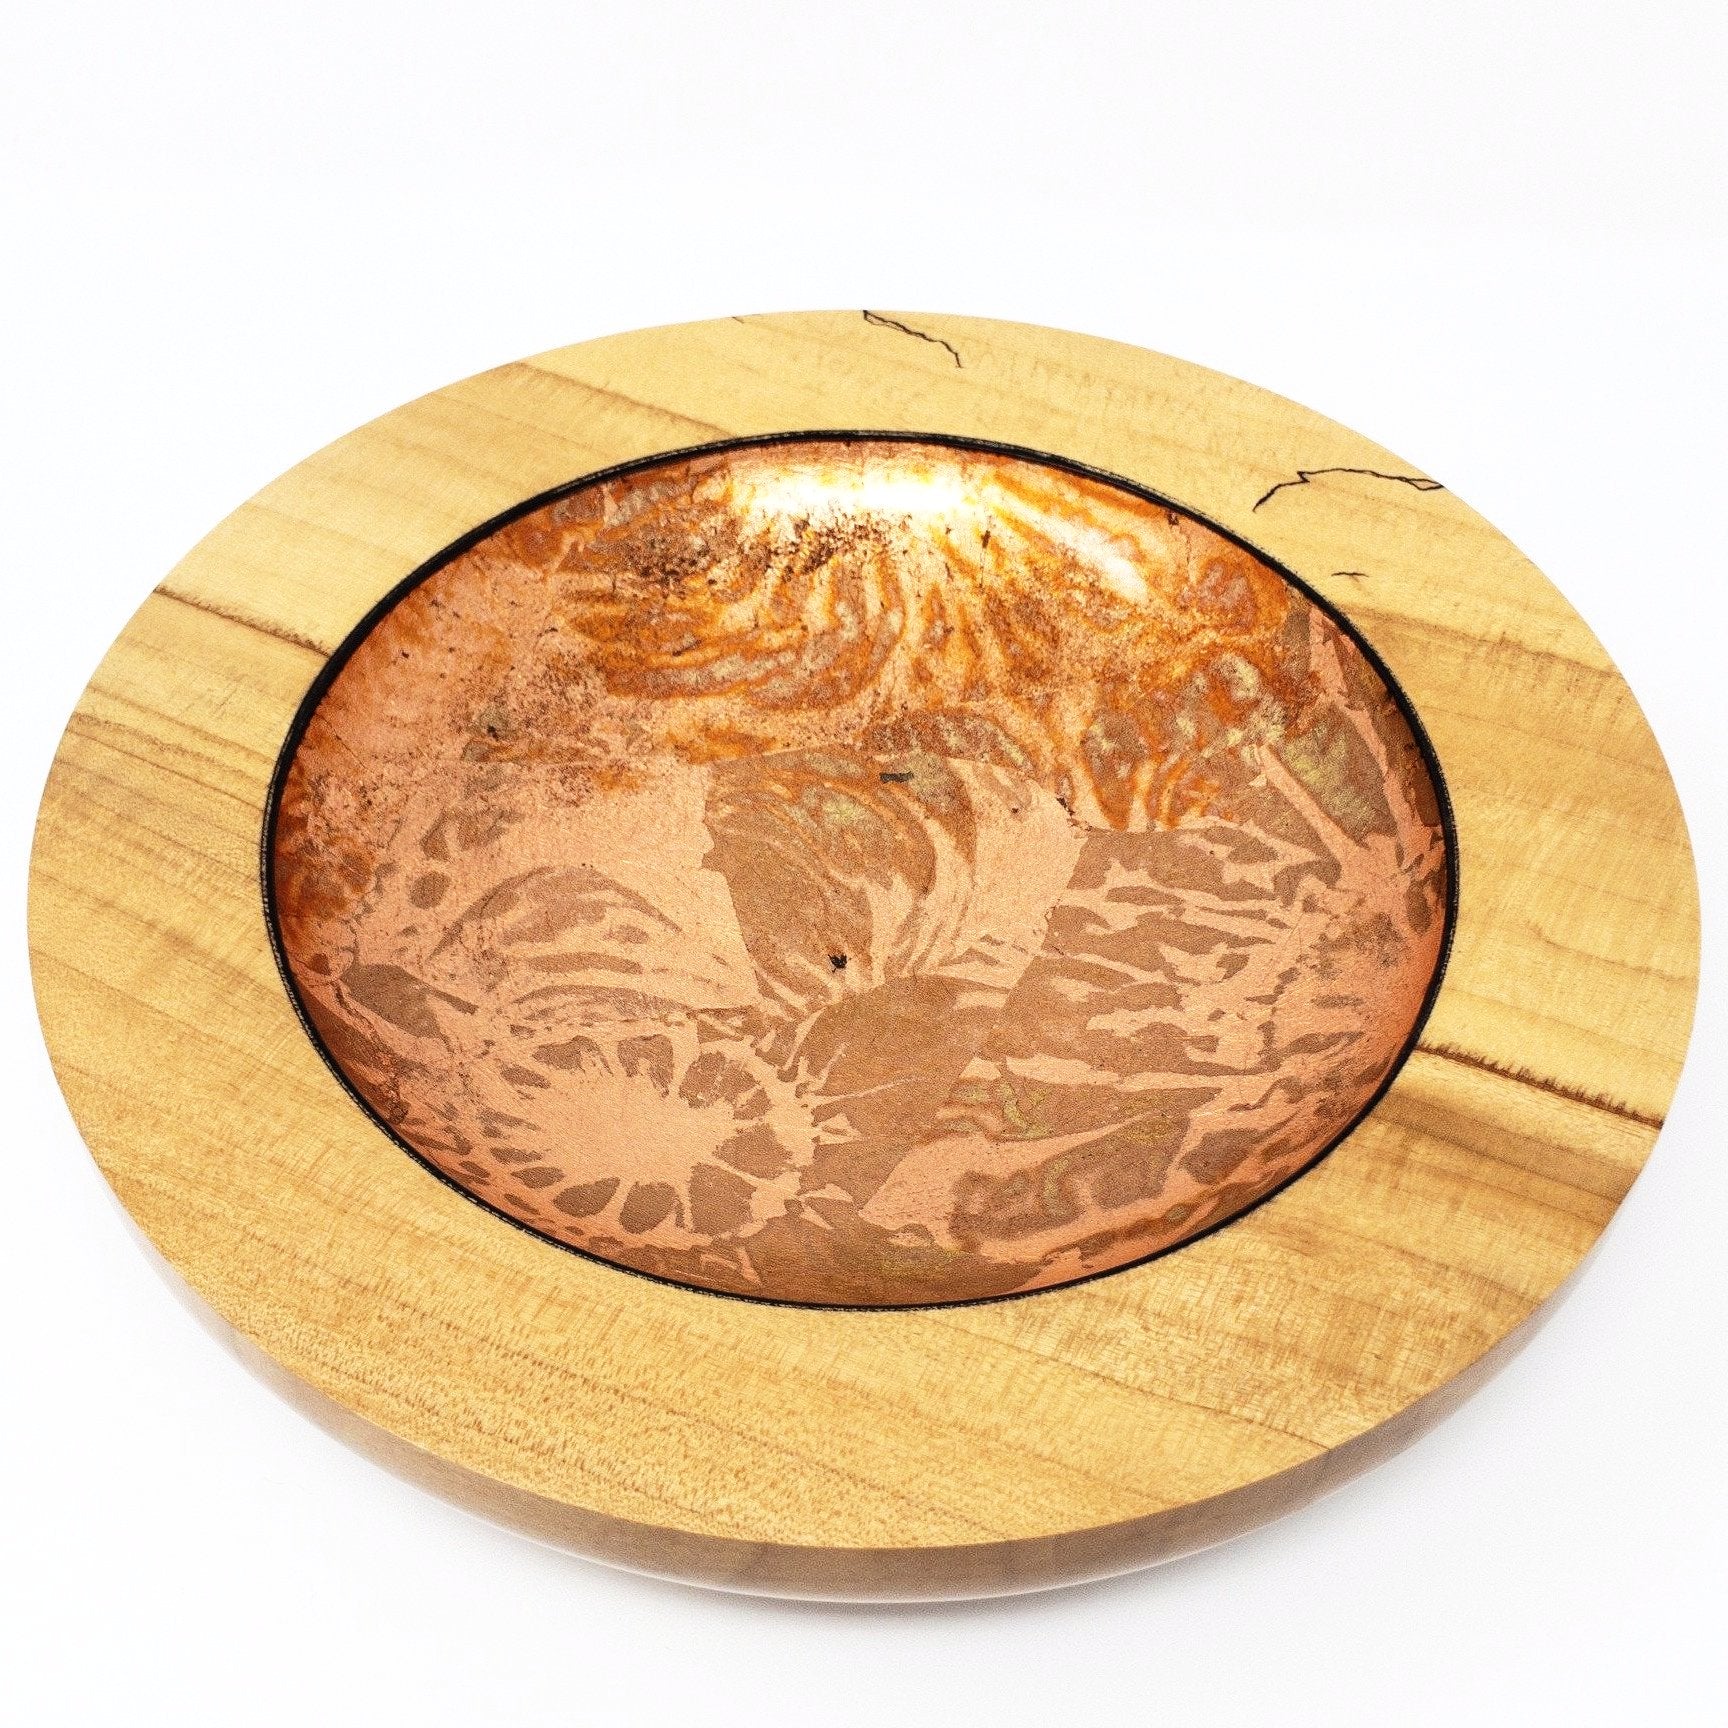 Stunning spalted Maple Art bowl with copper foil.